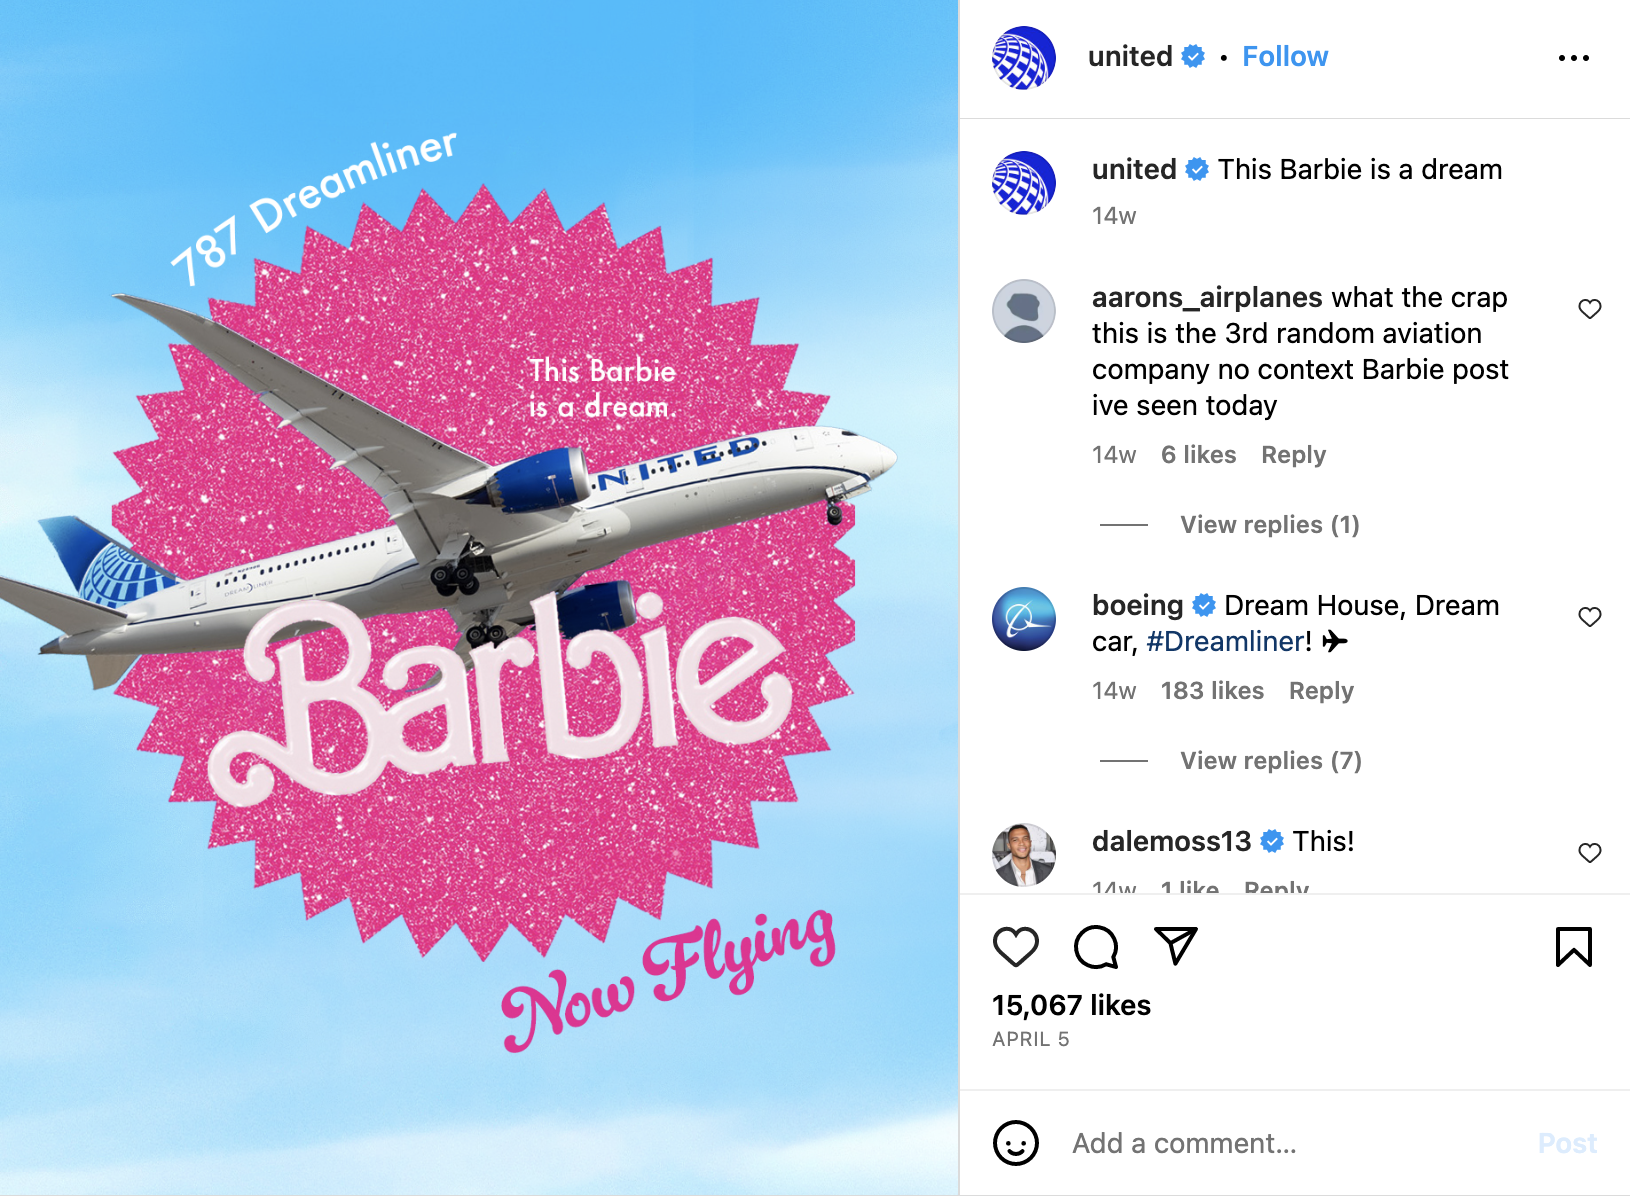 A blue sky background with a large Barbie logo in the center and a United airplane. Text around it reads: "This Barbie is a dream. Now flying."